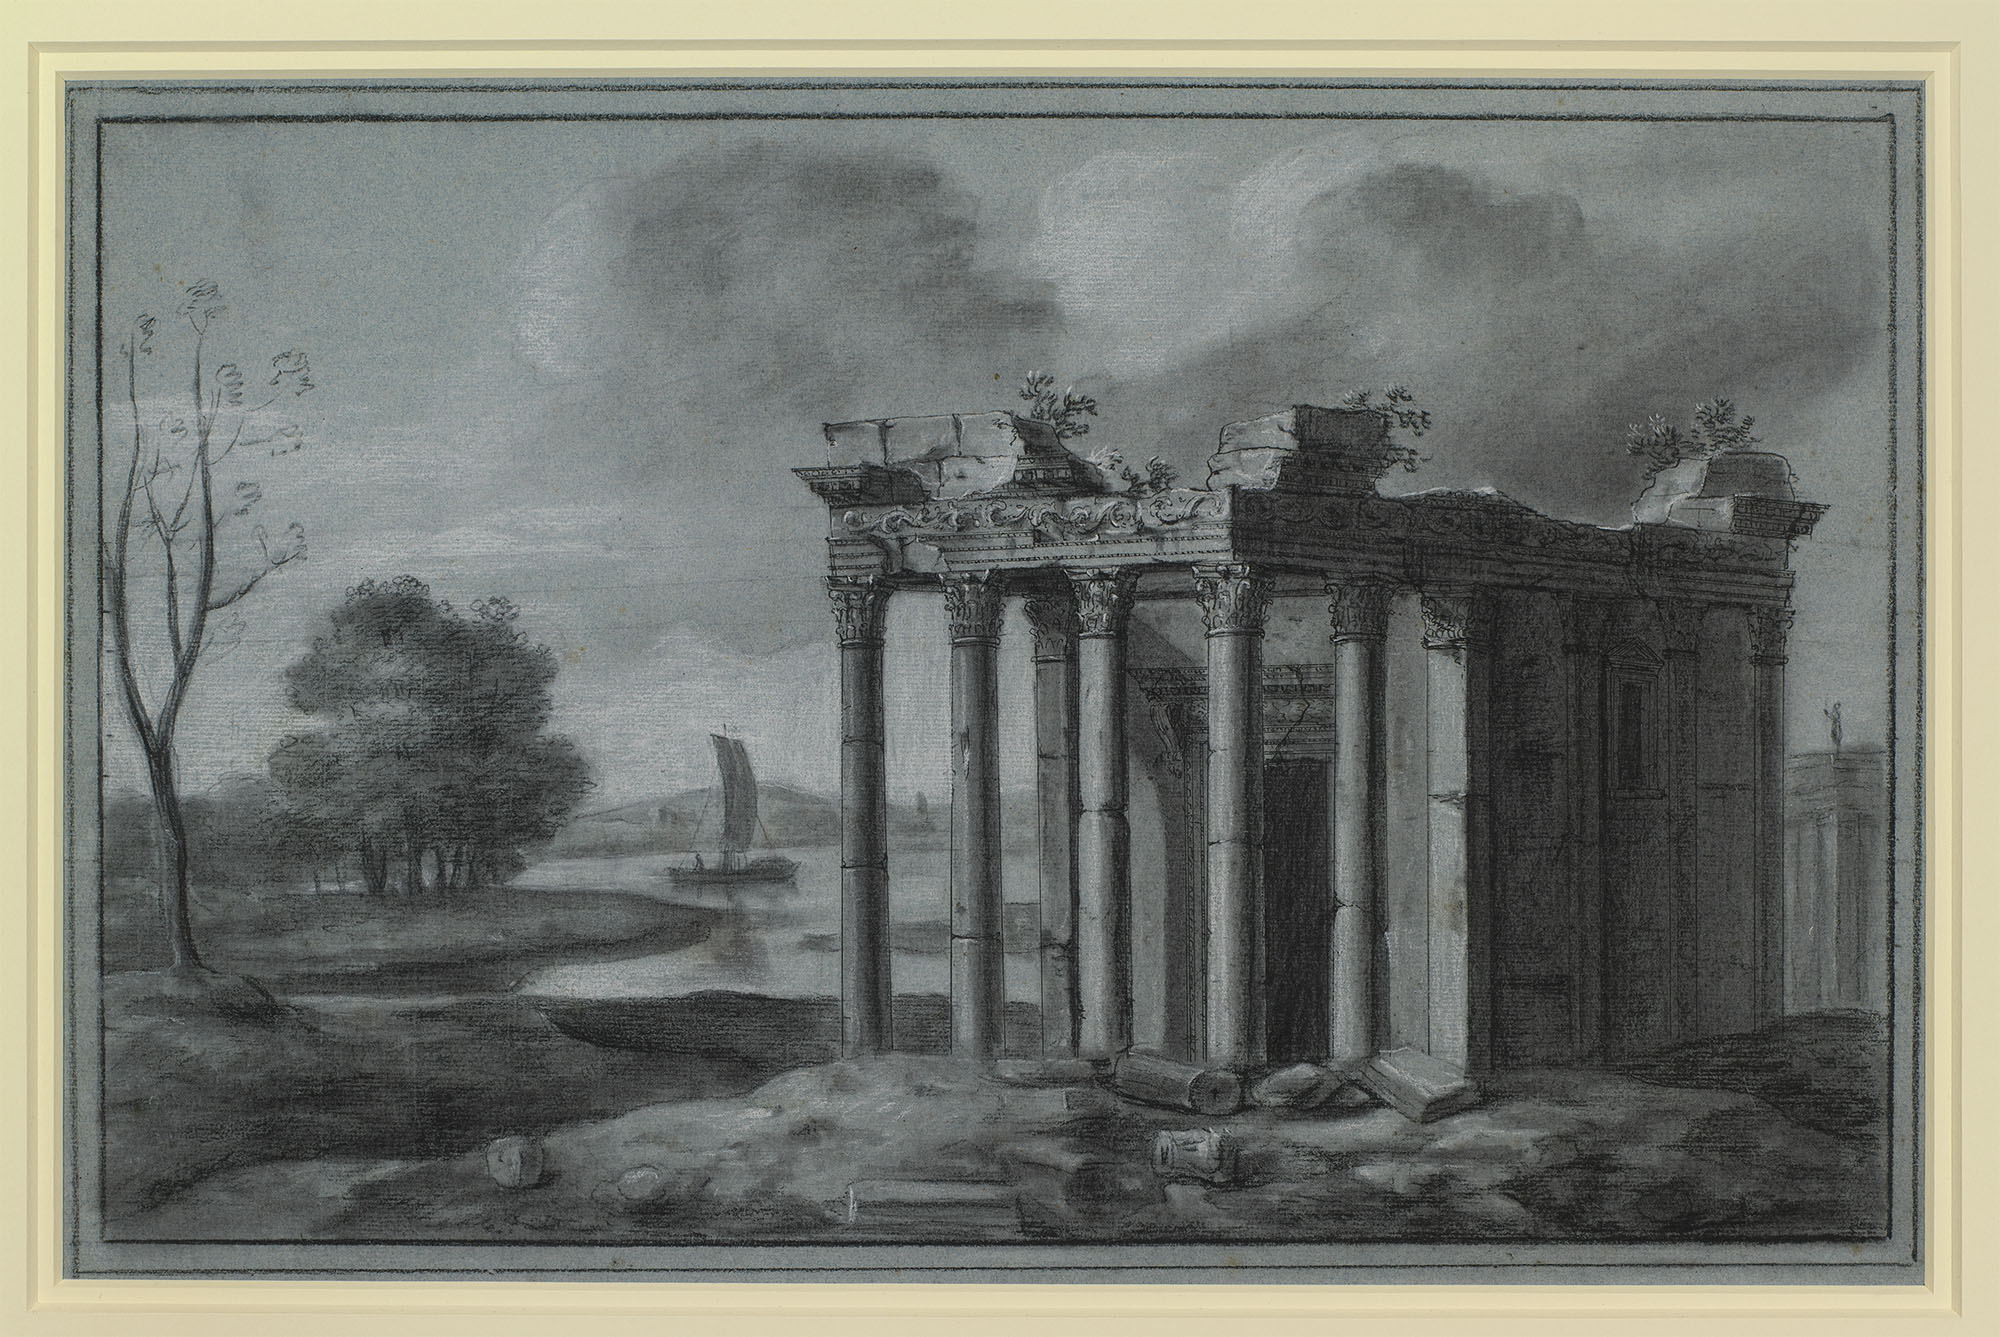 A chalk drawing showing a ruined temple by a lake. The temple is shown in the foreground, with the lake behind. A sailing boat is shown on the water. 
This is one of a series of forty-five loose drawings, in black and white chalk on blue-grey paper, origi